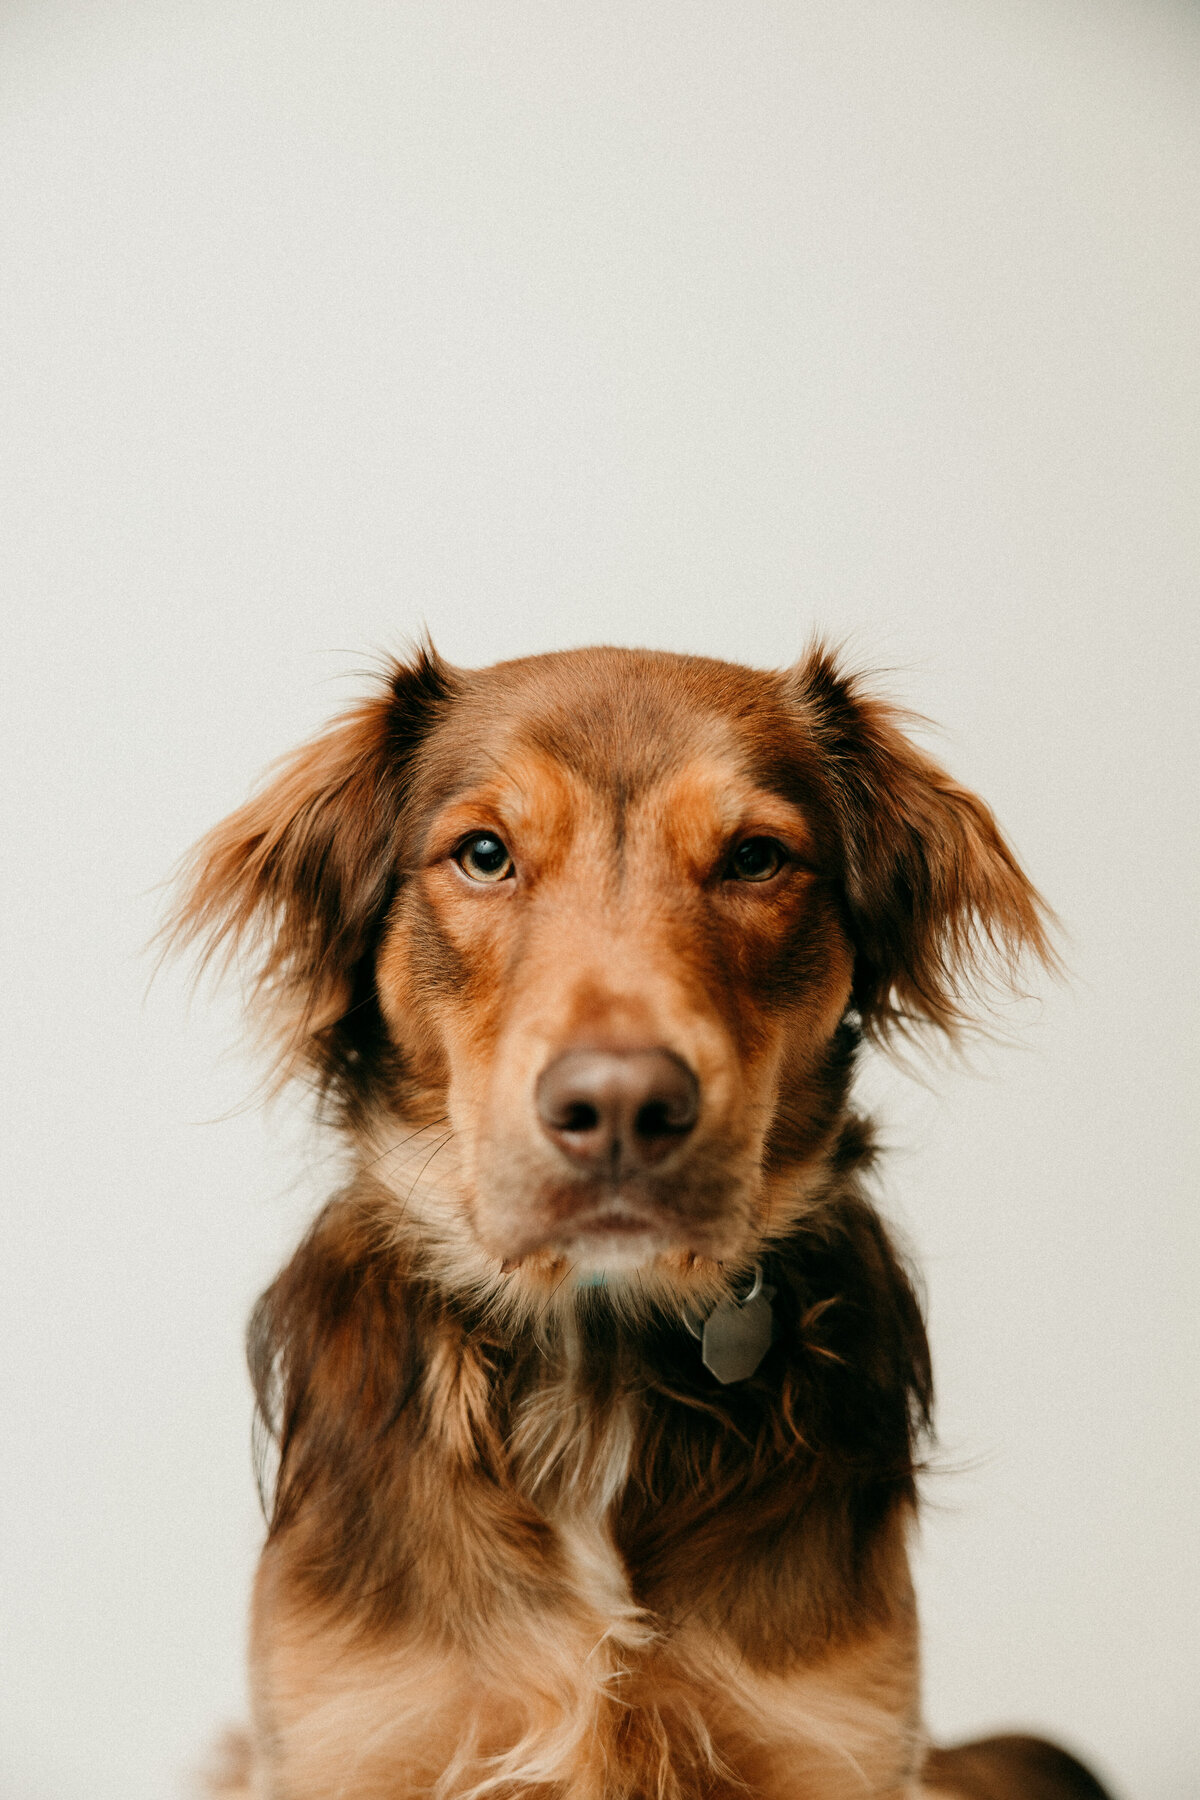 Red fluffy dog stares intently at the camera against a white background.